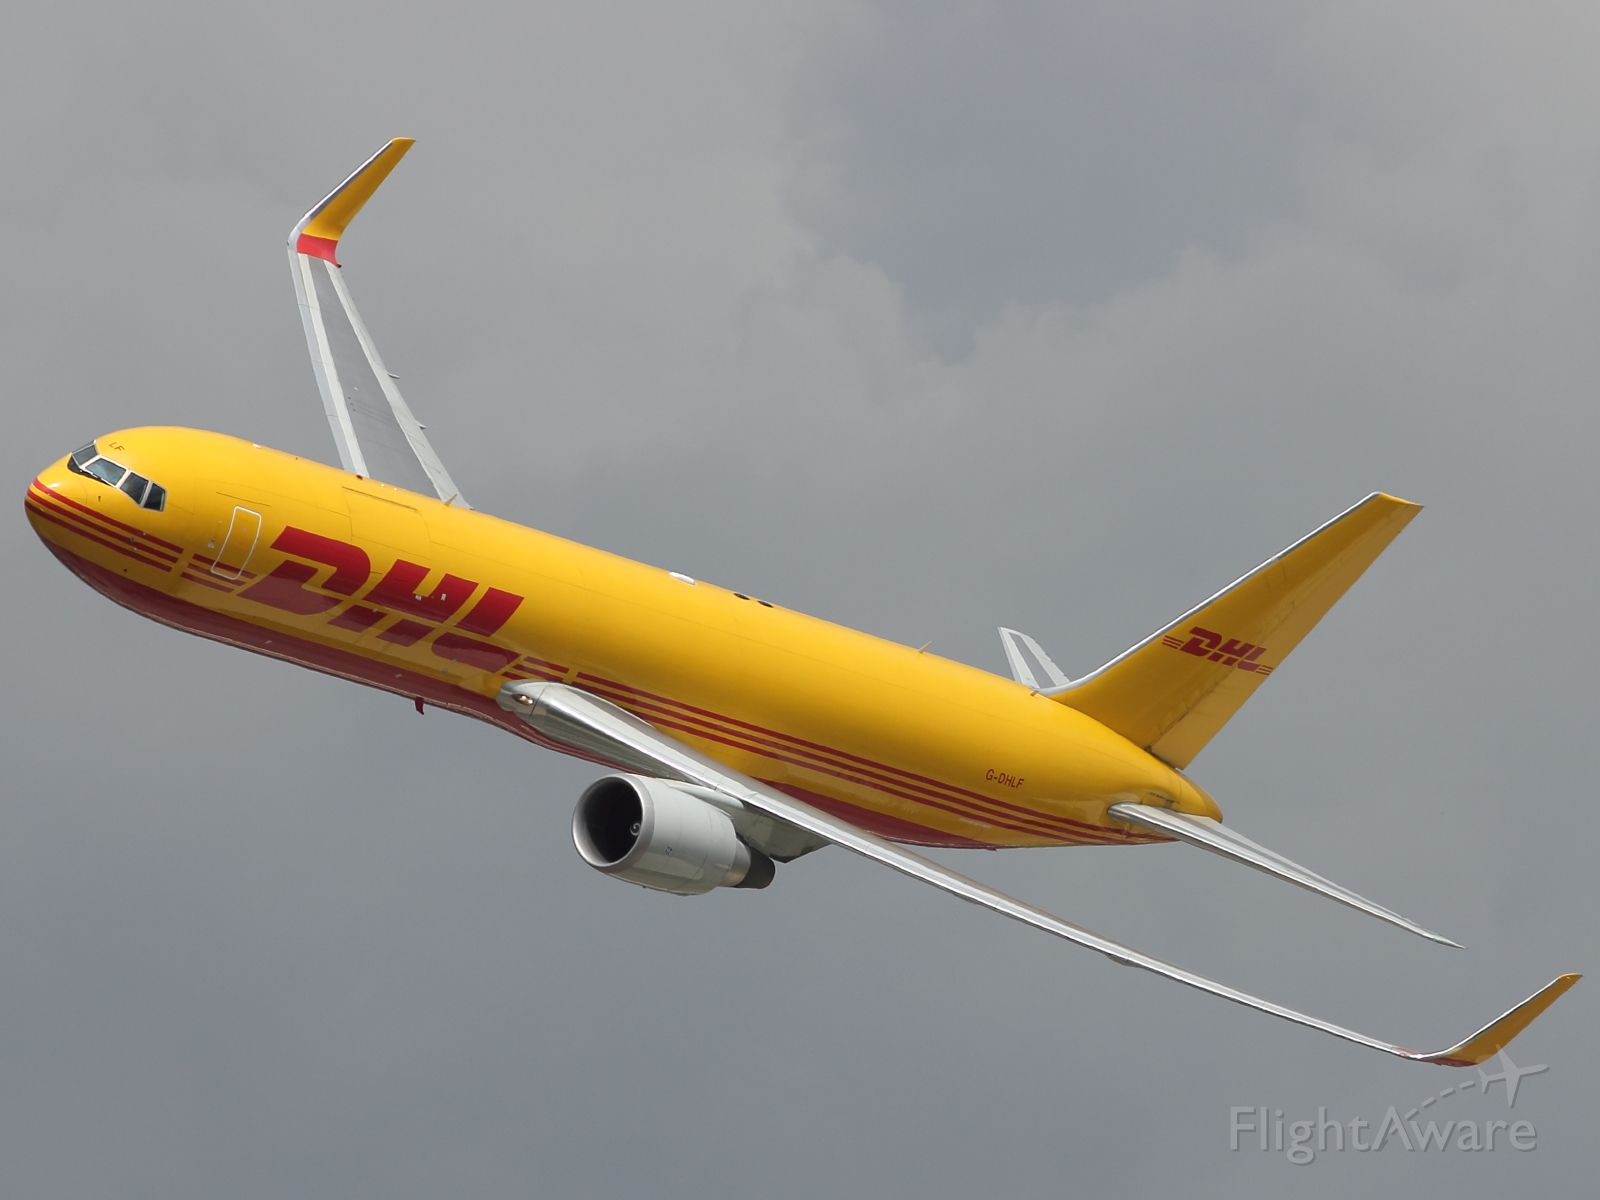 — — - It wasn't all fighters and bombers at RIAT 2012. Here we see a DHL B767-336ER run through an impressive low level flying display. Make a nice change of pace for the pilots, used to hauling cargo around the globe!